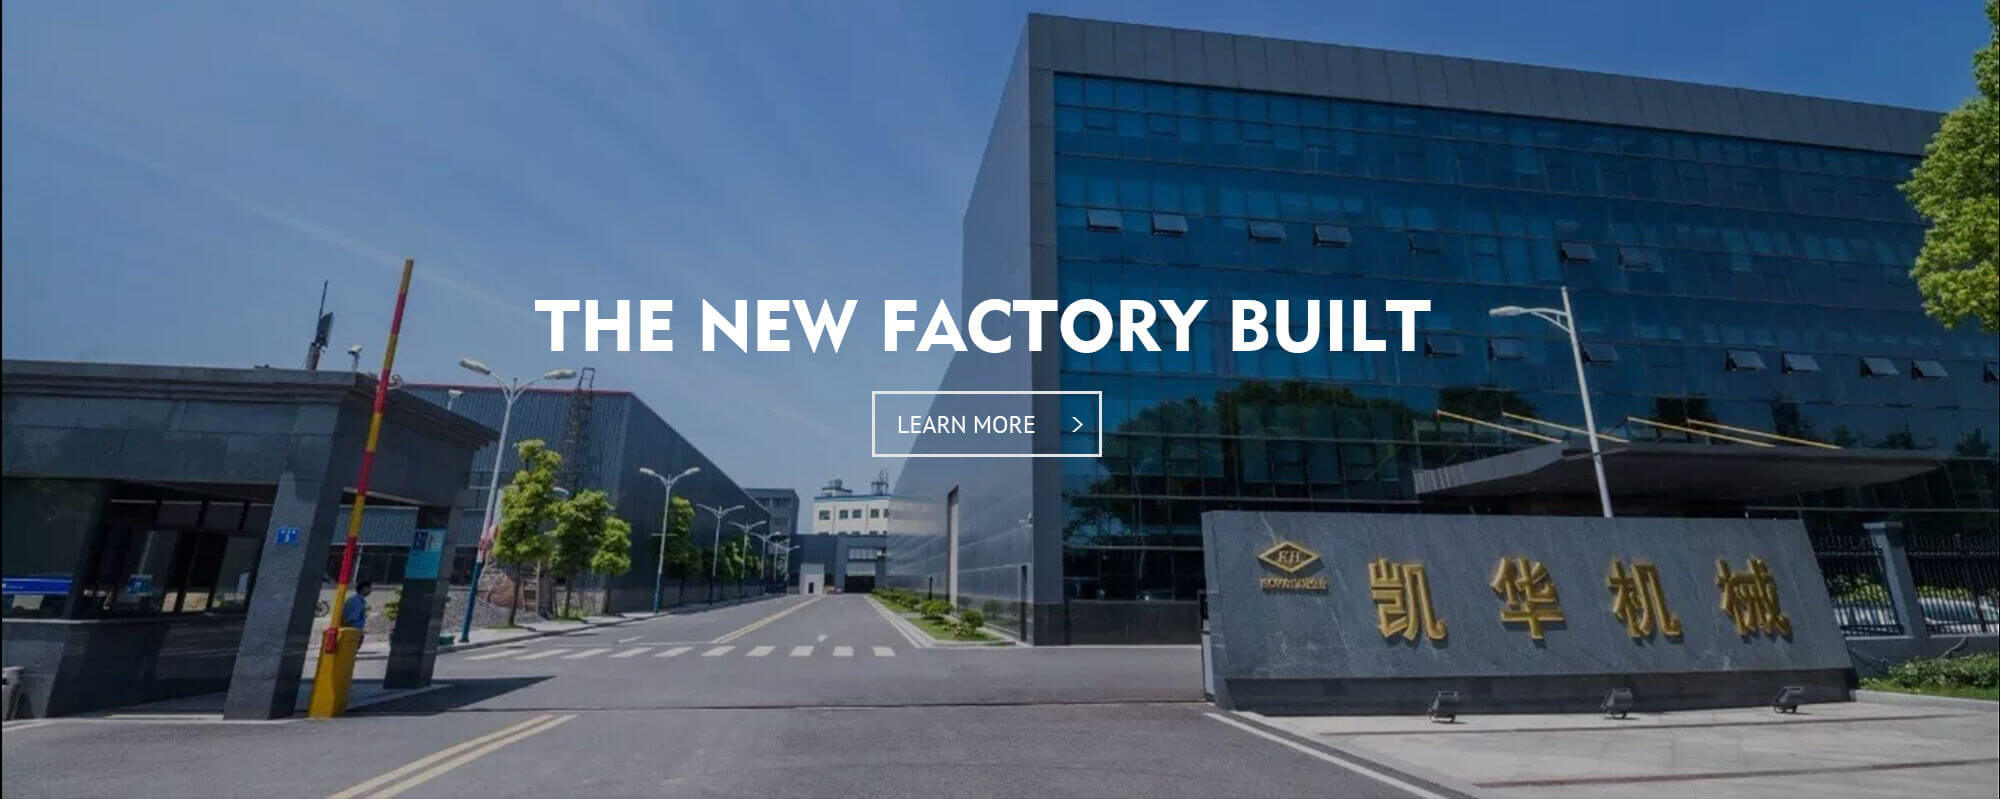 The new factory built